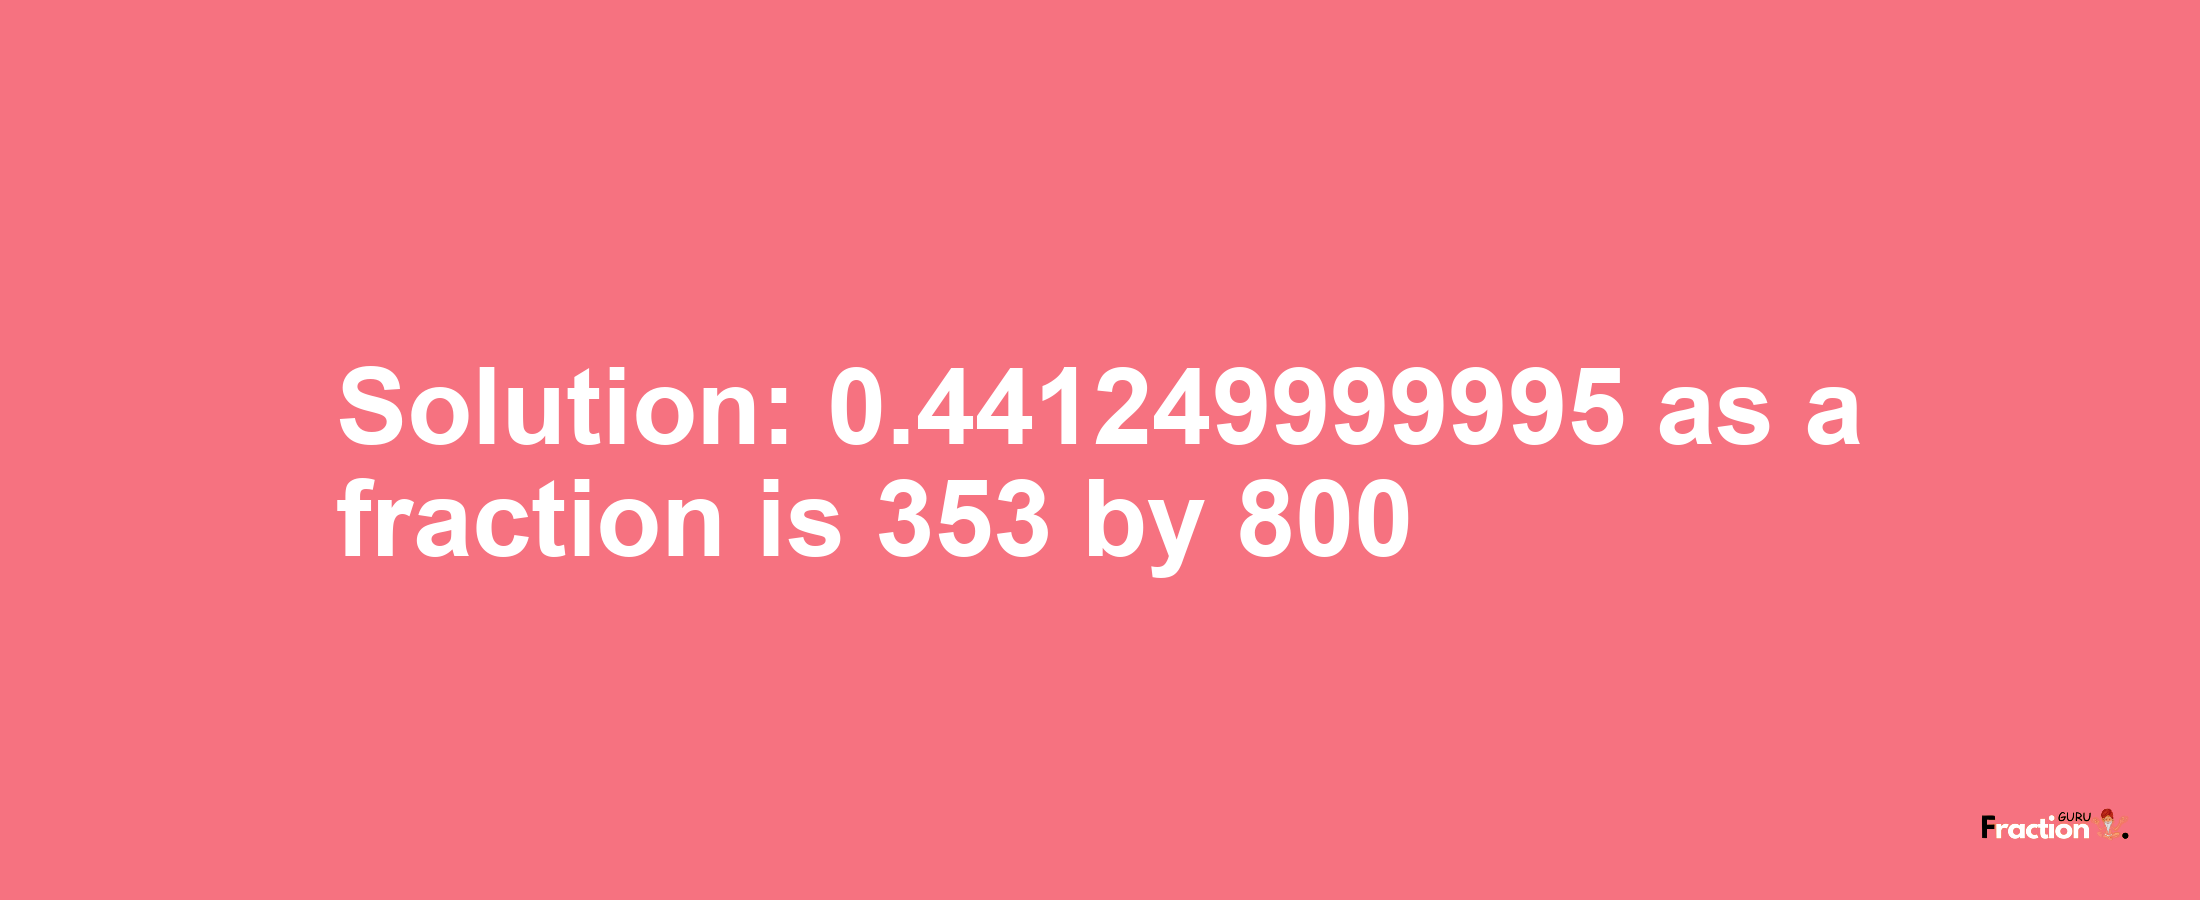 Solution:0.441249999995 as a fraction is 353/800